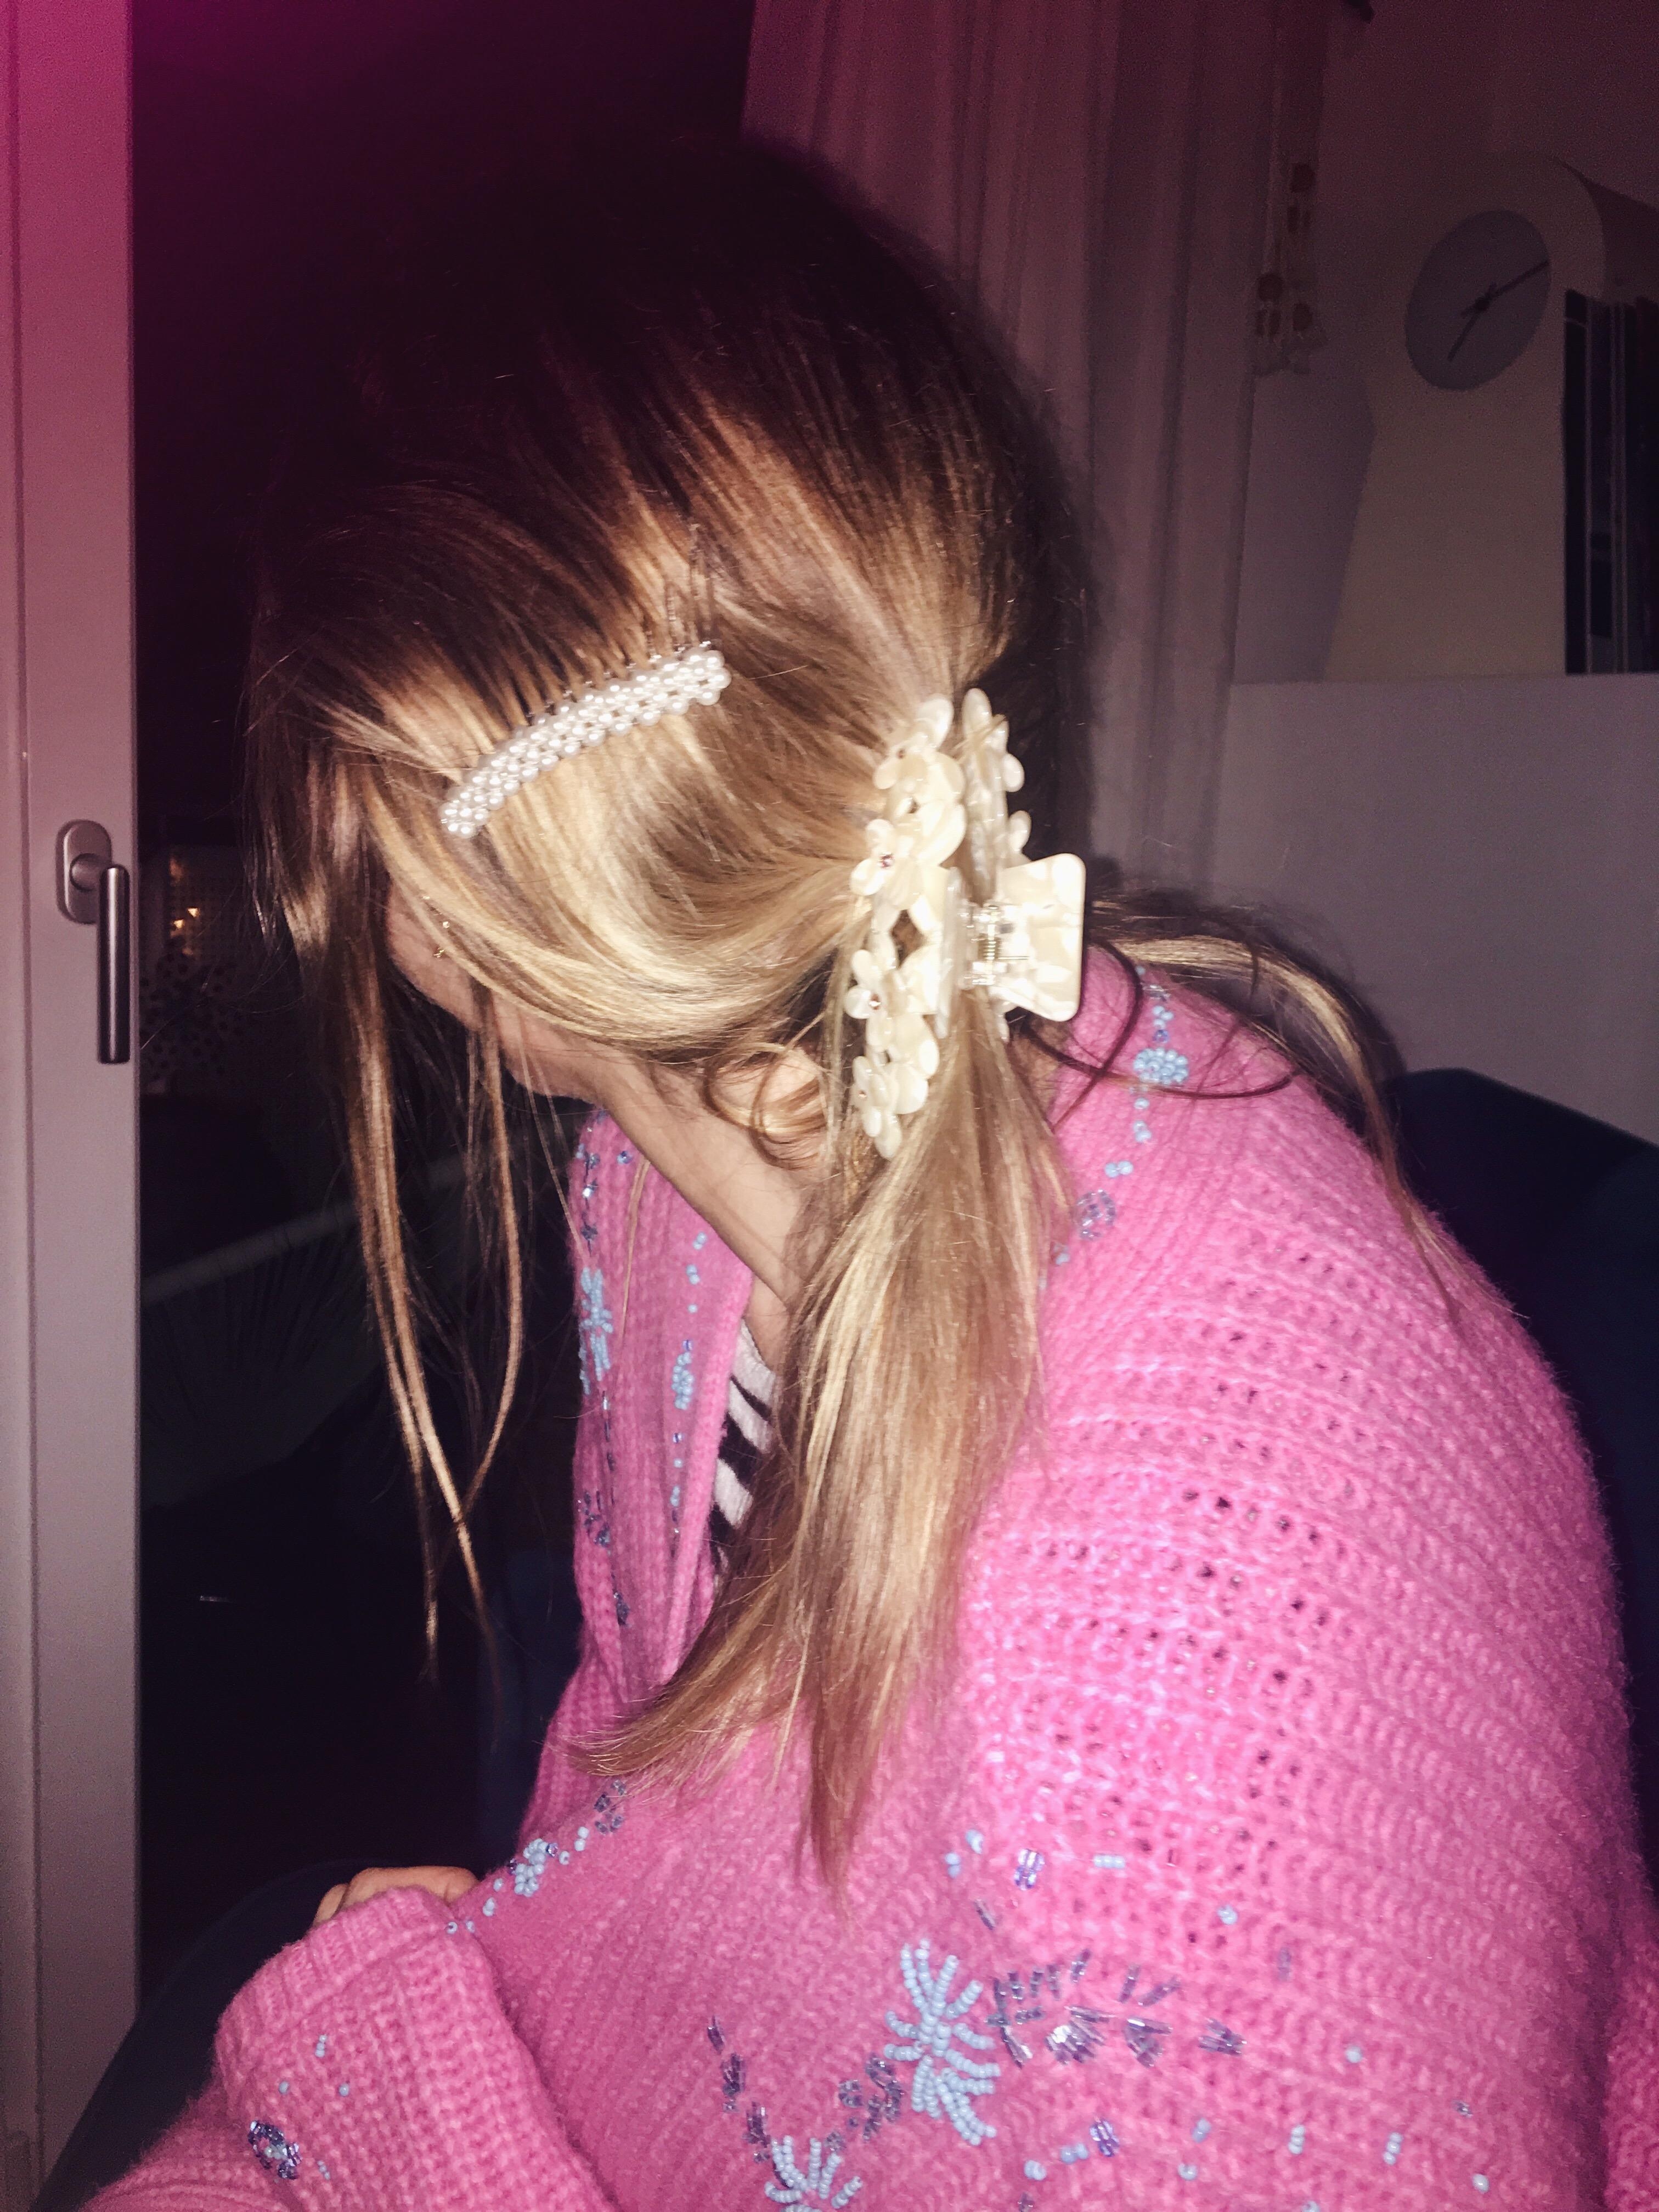 Sunday afternoon cozy at home🧚🏻‍♀️ #hair #hairstyle #accessories #hairclips #hyggelife #knitwear #weekendmood